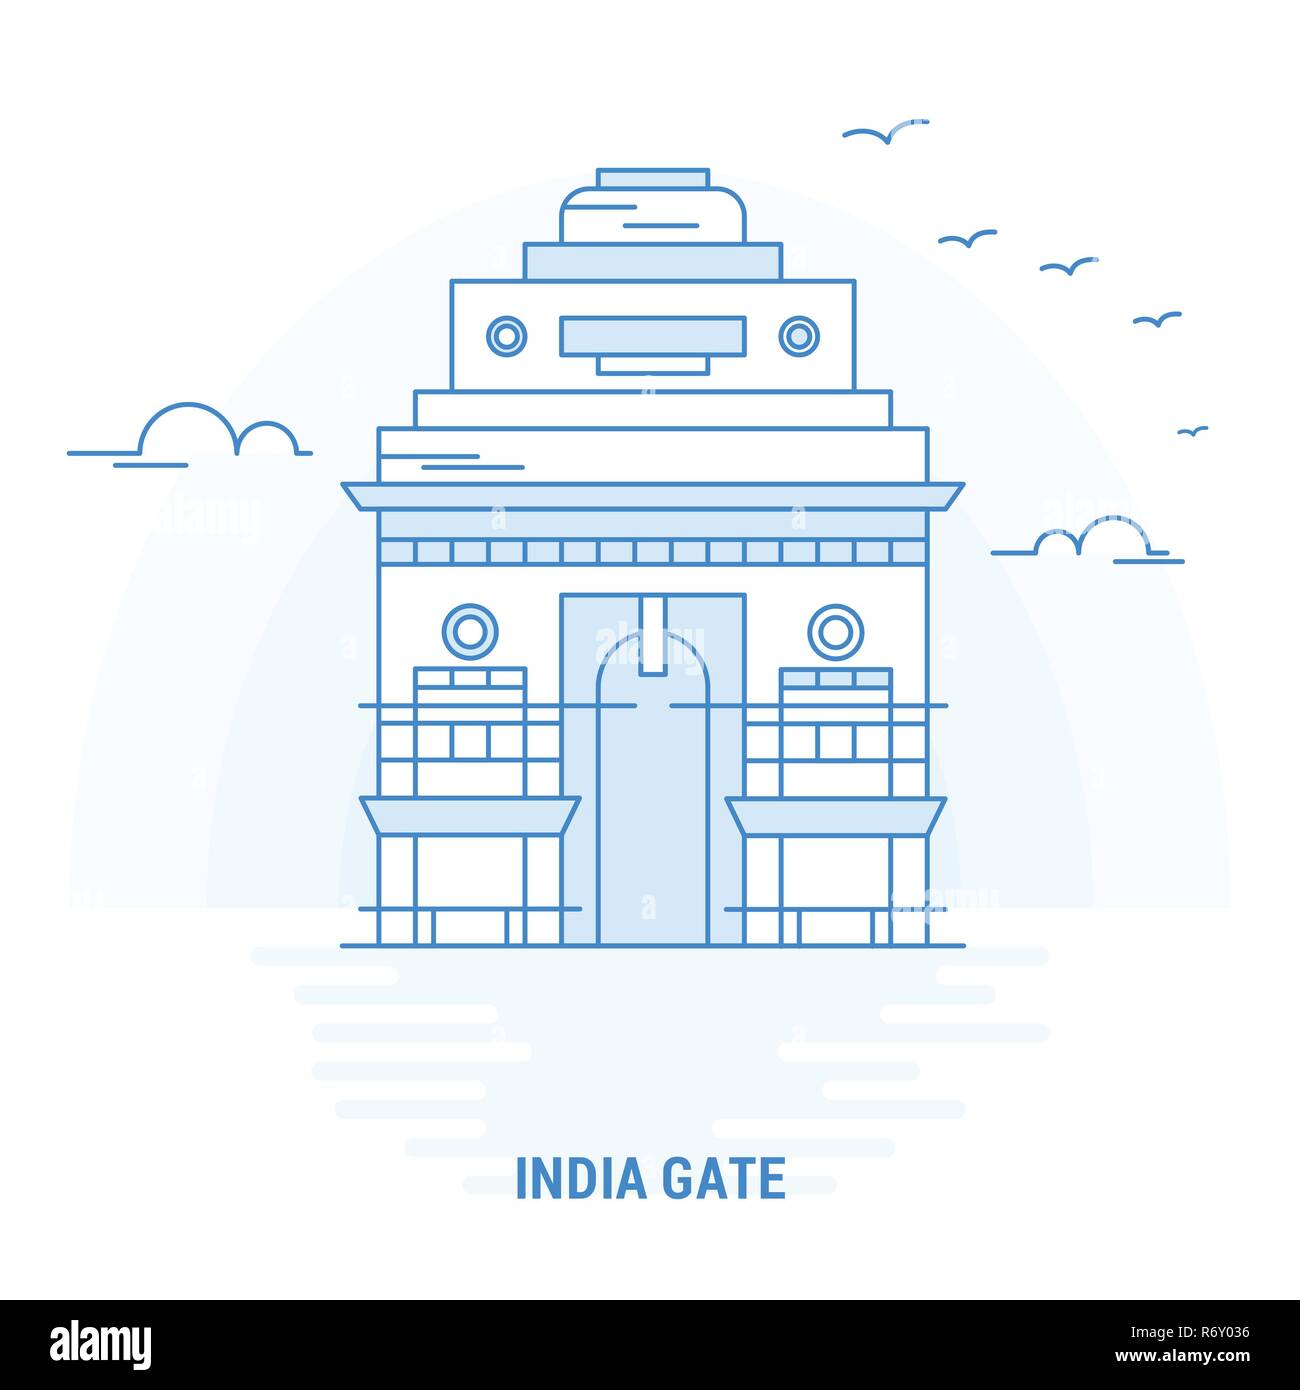 INDIA GATE Blue Landmark. Creative background and Poster Template Stock Vector